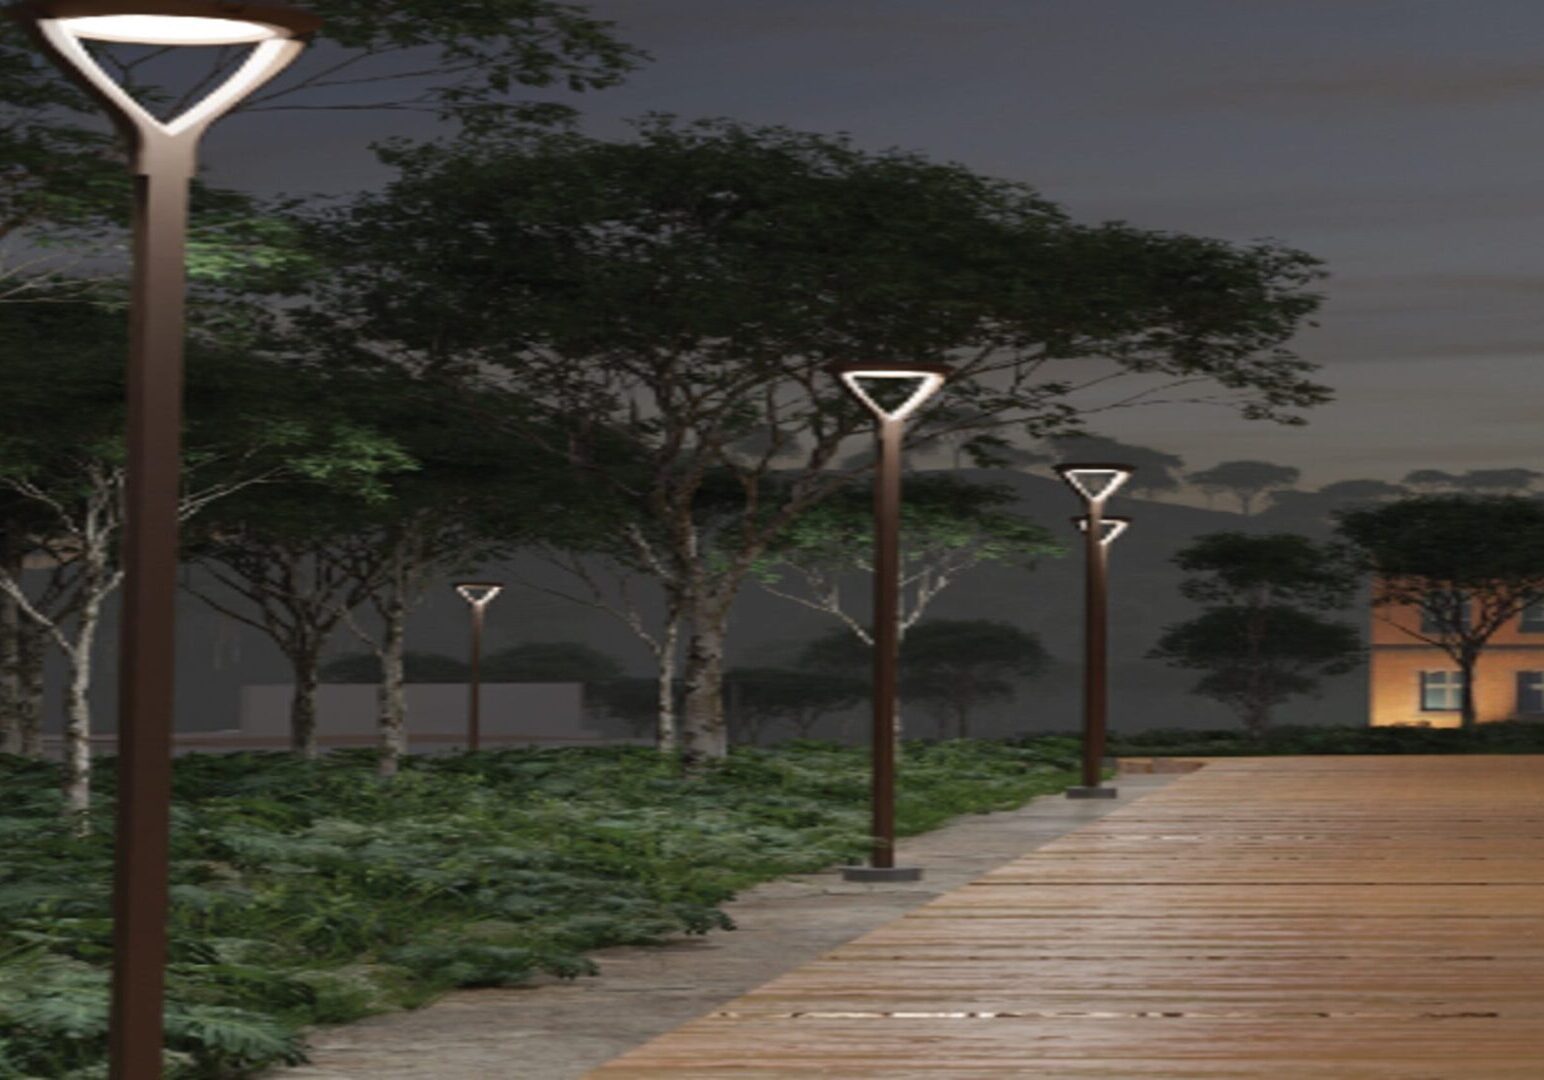 A rendering of the walkway at night with trees and lights.